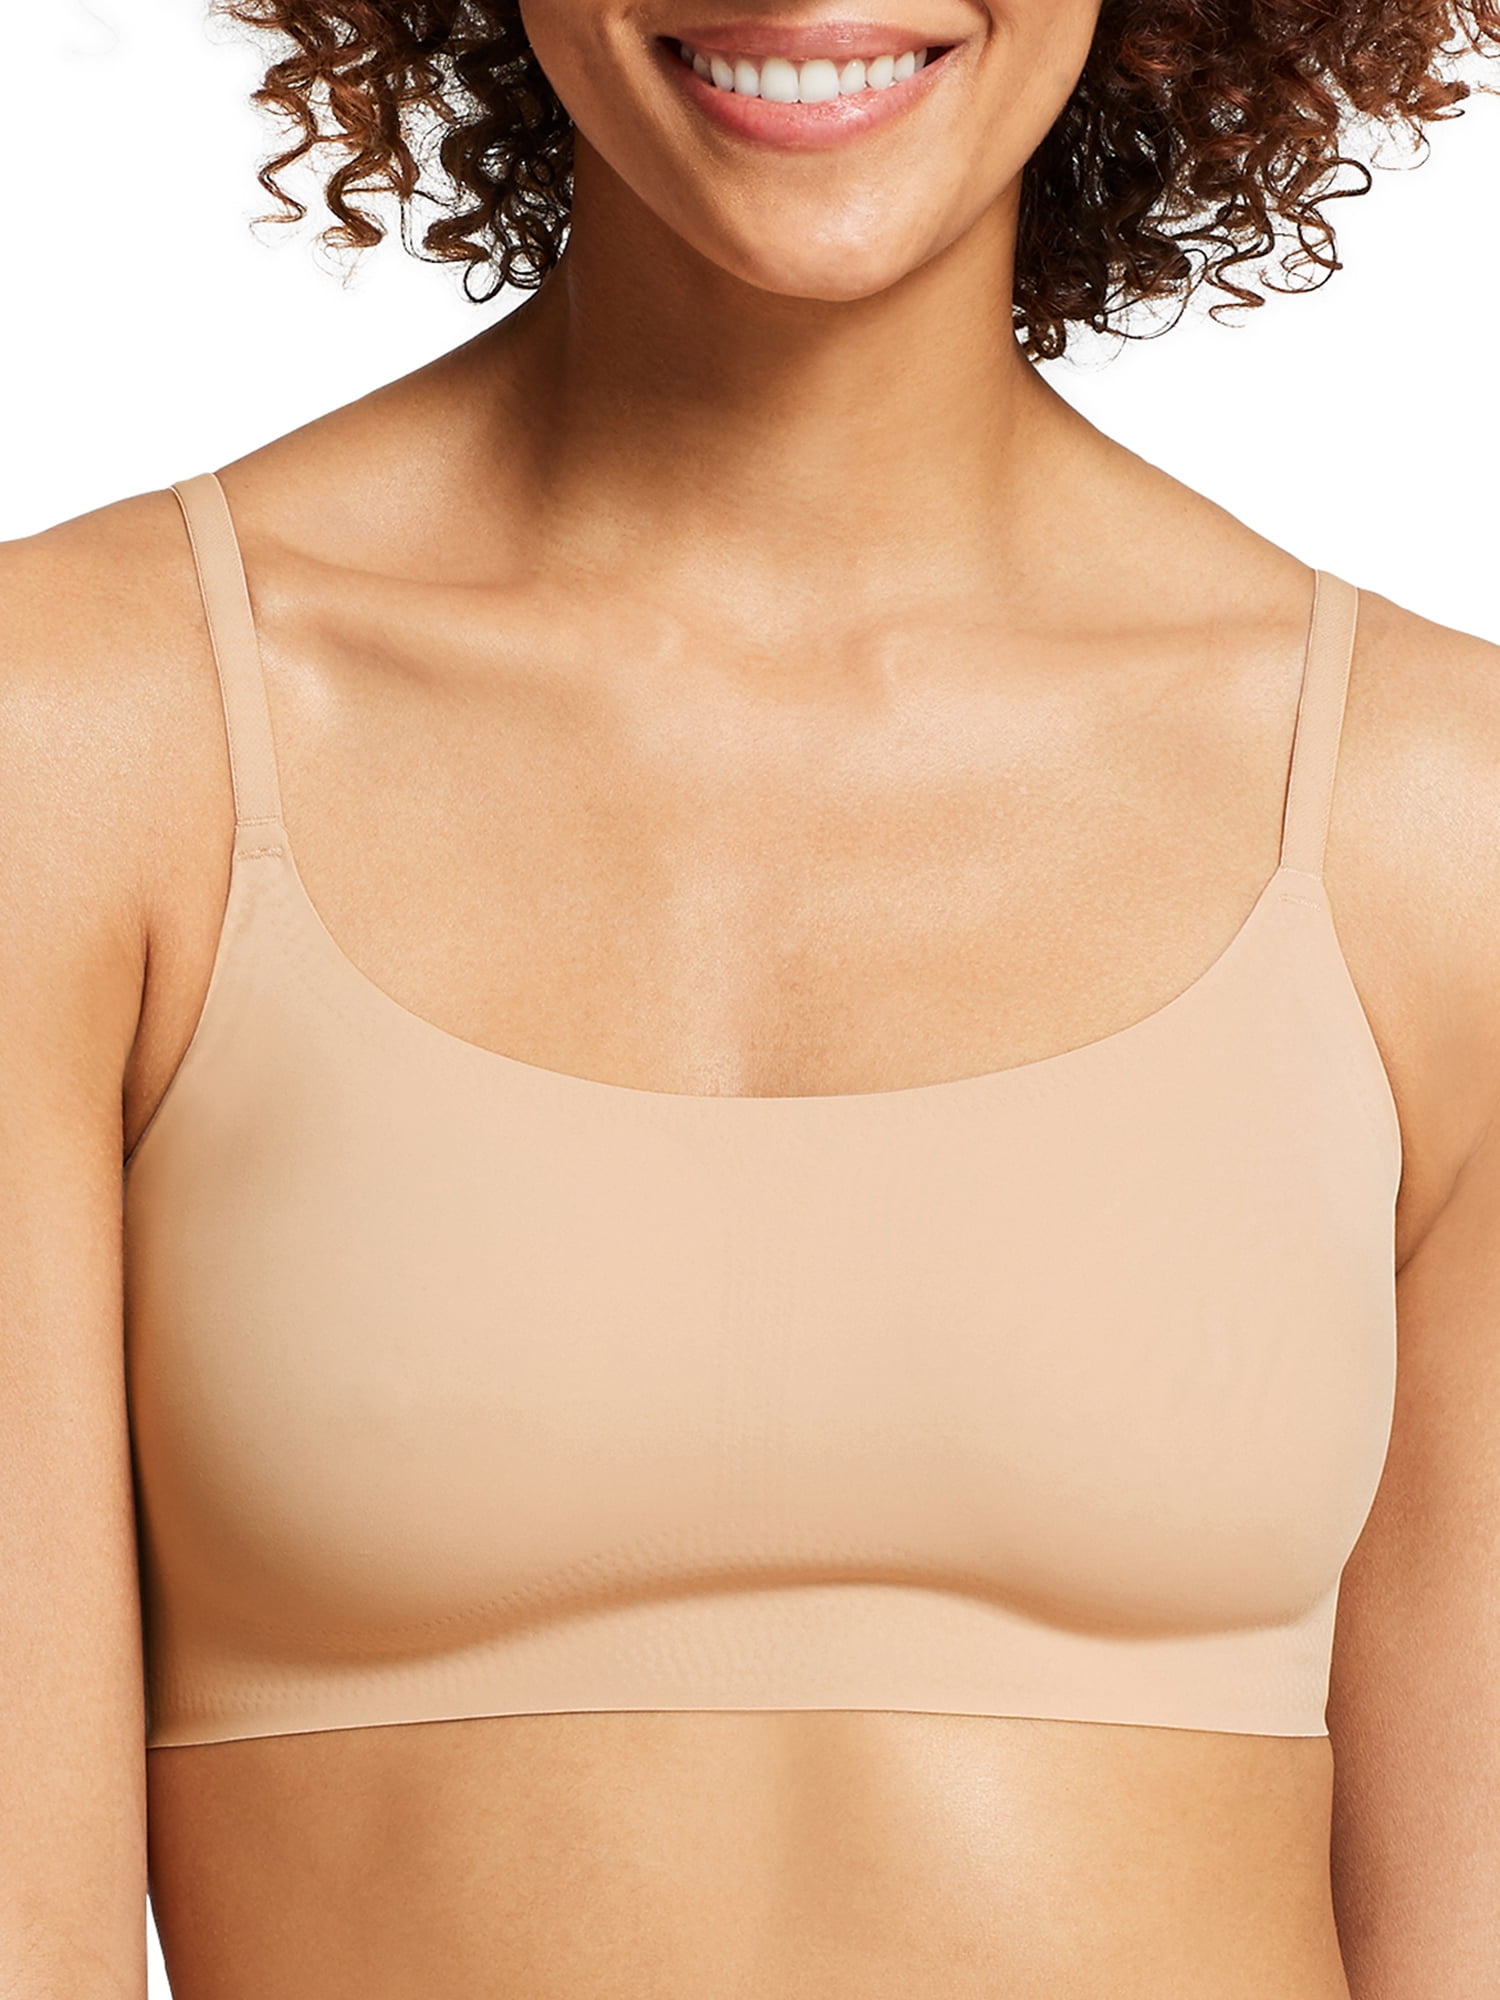 Tomkot Women's Solid Non-Wired Lightly Padded Everyday Bra.Soft and smooth  Adjustable straps rest comfortably